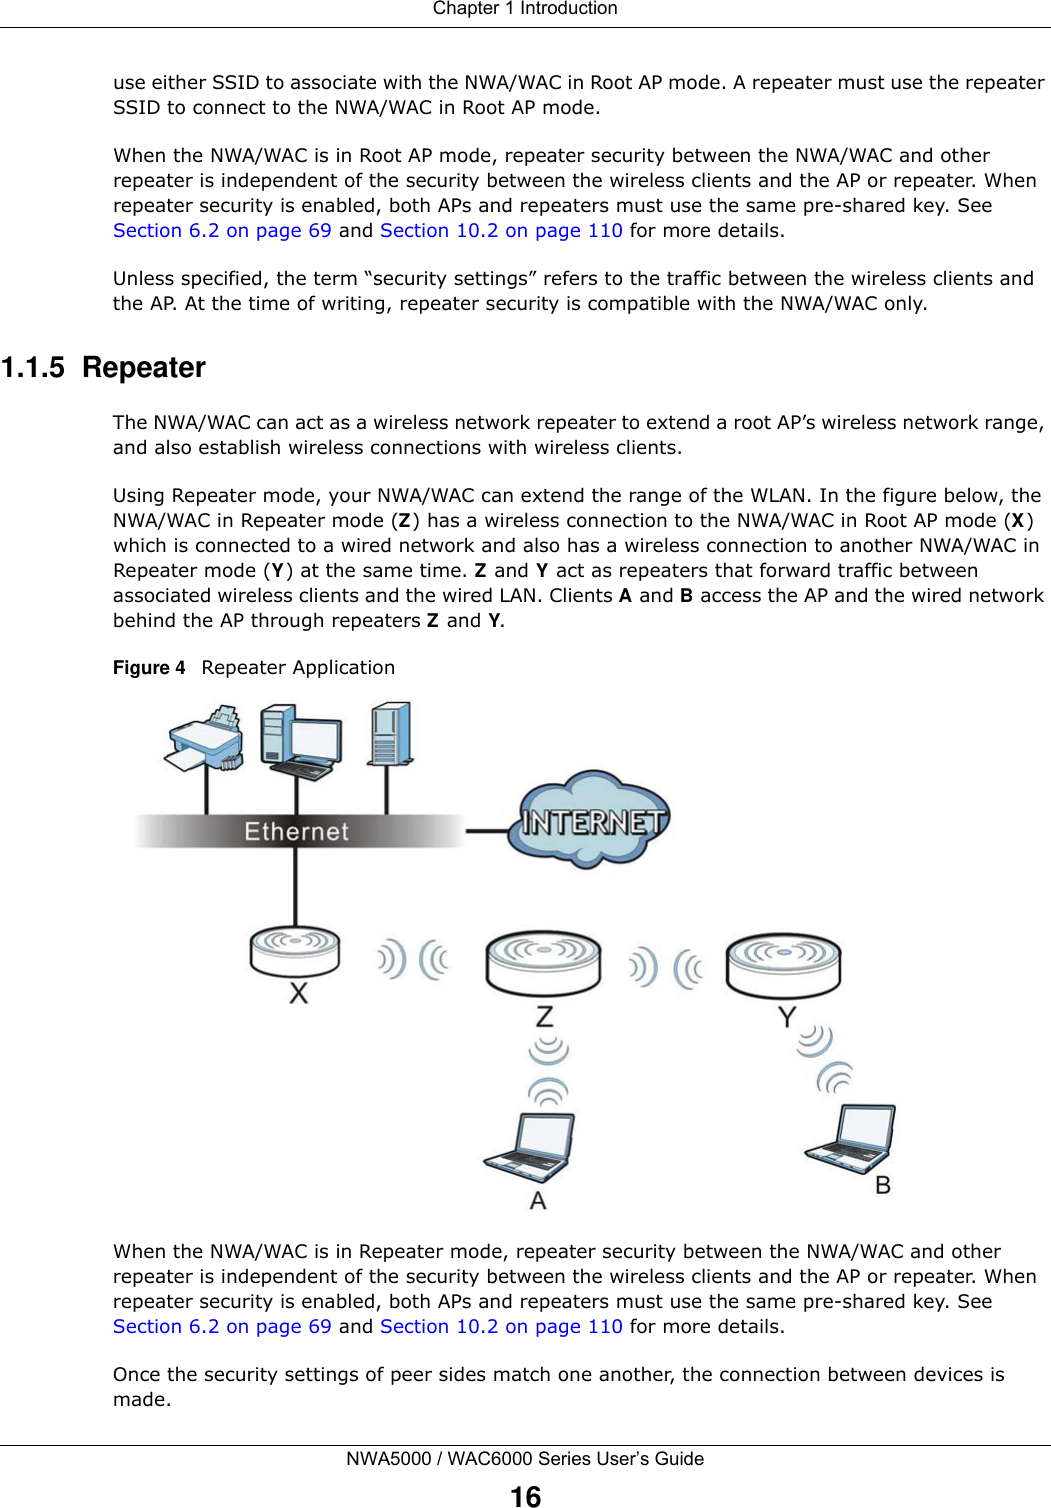 Chapter 1 IntroductionNWA5000 / WAC6000 Series User’s Guide16use either SSID to associate with the NWA/WAC in Root AP mode. A repeater must use the repeater SSID to connect to the NWA/WAC in Root AP mode.When the NWA/WAC is in Root AP mode, repeater security between the NWA/WAC and other repeater is independent of the security between the wireless clients and the AP or repeater. When repeater security is enabled, both APs and repeaters must use the same pre-shared key. See Section 6.2 on page 69 and Section 10.2 on page 110 for more details.Unless specified, the term “security settings” refers to the traffic between the wireless clients and the AP. At the time of writing, repeater security is compatible with the NWA/WAC only. 1.1.5  RepeaterThe NWA/WAC can act as a wireless network repeater to extend a root AP’s wireless network range, and also establish wireless connections with wireless clients. Using Repeater mode, your NWA/WAC can extend the range of the WLAN. In the figure below, the NWA/WAC in Repeater mode (Z) has a wireless connection to the NWA/WAC in Root AP mode (X) which is connected to a wired network and also has a wireless connection to another NWA/WAC in Repeater mode (Y) at the same time. Z and Y act as repeaters that forward traffic between associated wireless clients and the wired LAN. Clients A and B access the AP and the wired network behind the AP through repeaters Z and Y.Figure 4   Repeater ApplicationWhen the NWA/WAC is in Repeater mode, repeater security between the NWA/WAC and other repeater is independent of the security between the wireless clients and the AP or repeater. When repeater security is enabled, both APs and repeaters must use the same pre-shared key. See Section 6.2 on page 69 and Section 10.2 on page 110 for more details. Once the security settings of peer sides match one another, the connection between devices is made.